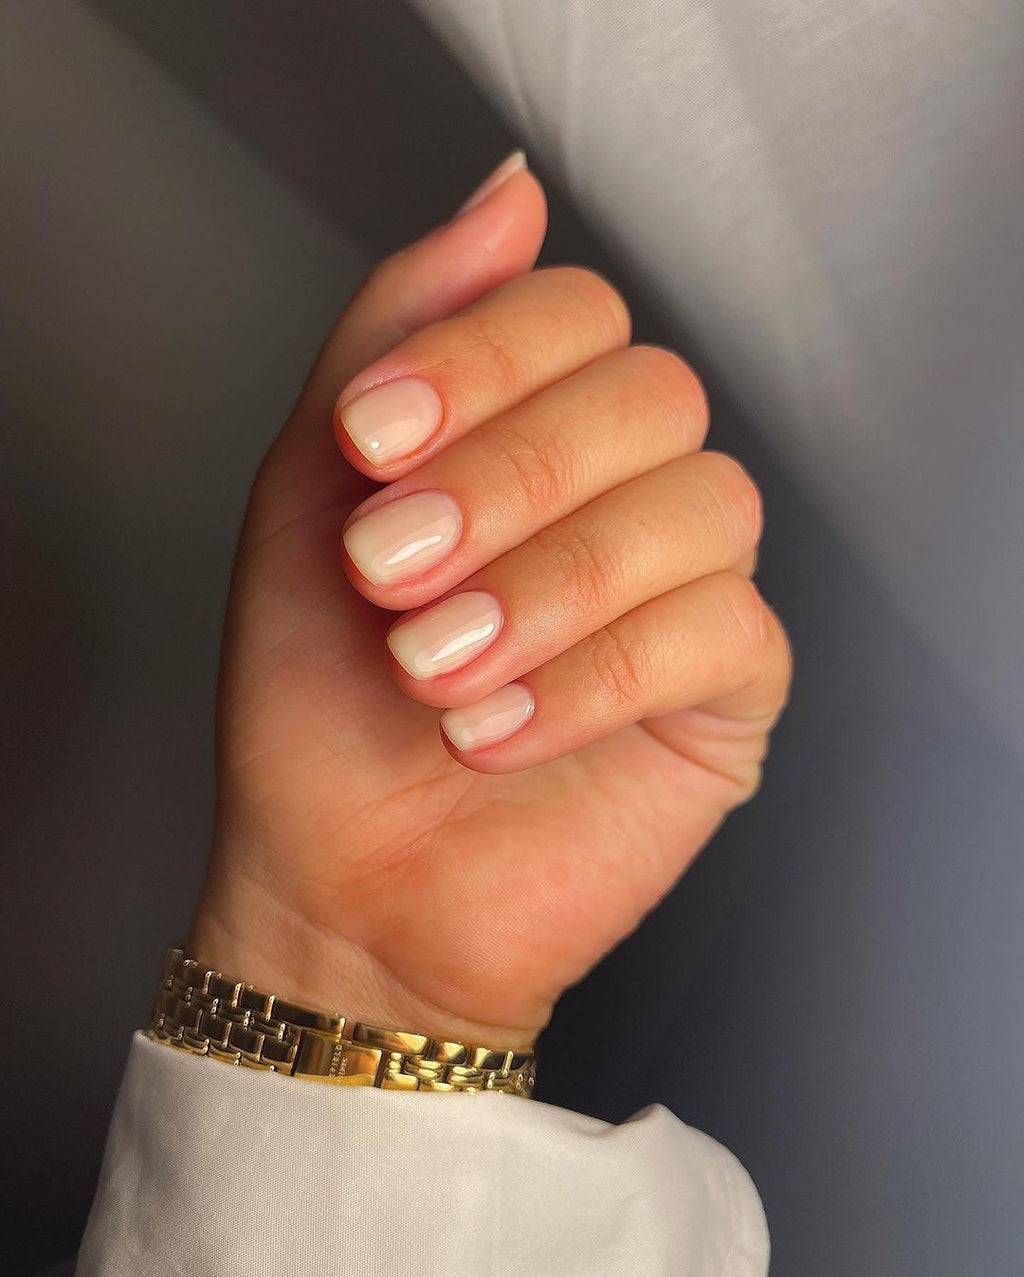 How To Treat Your Natural Nails – Bio Sculpture